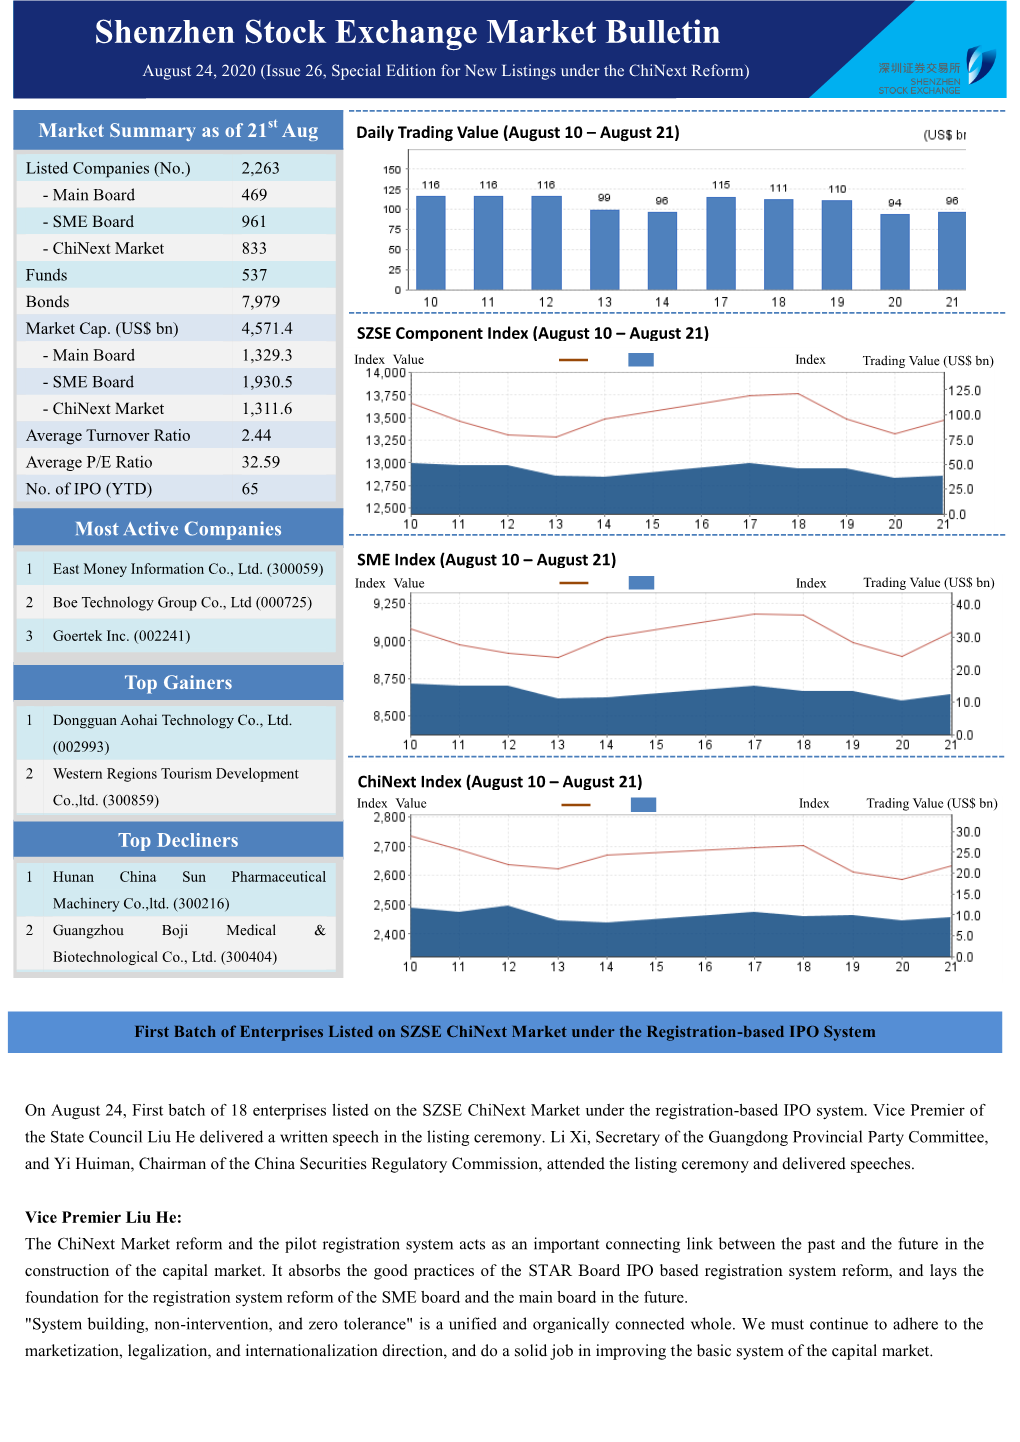 Shenzhen Stock Exchange Market Bulletin August 24, 2020 (Issue 26, Special Edition for New Listings Under the Chinext Reform)